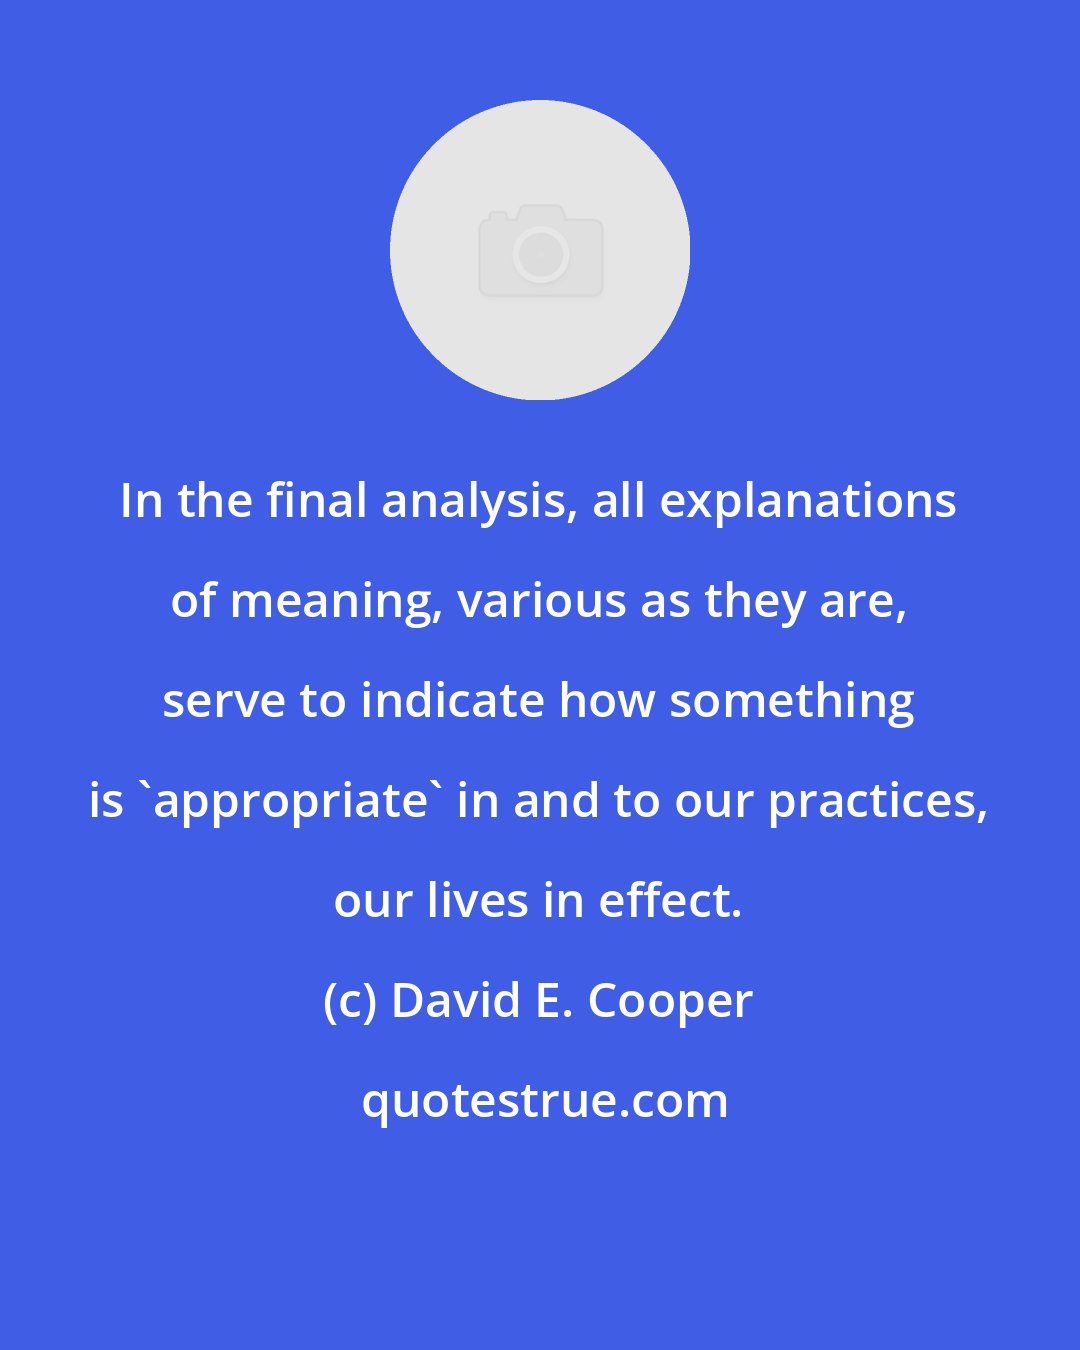 David E. Cooper: In the final analysis, all explanations of meaning, various as they are, serve to indicate how something is 'appropriate' in and to our practices, our lives in effect.